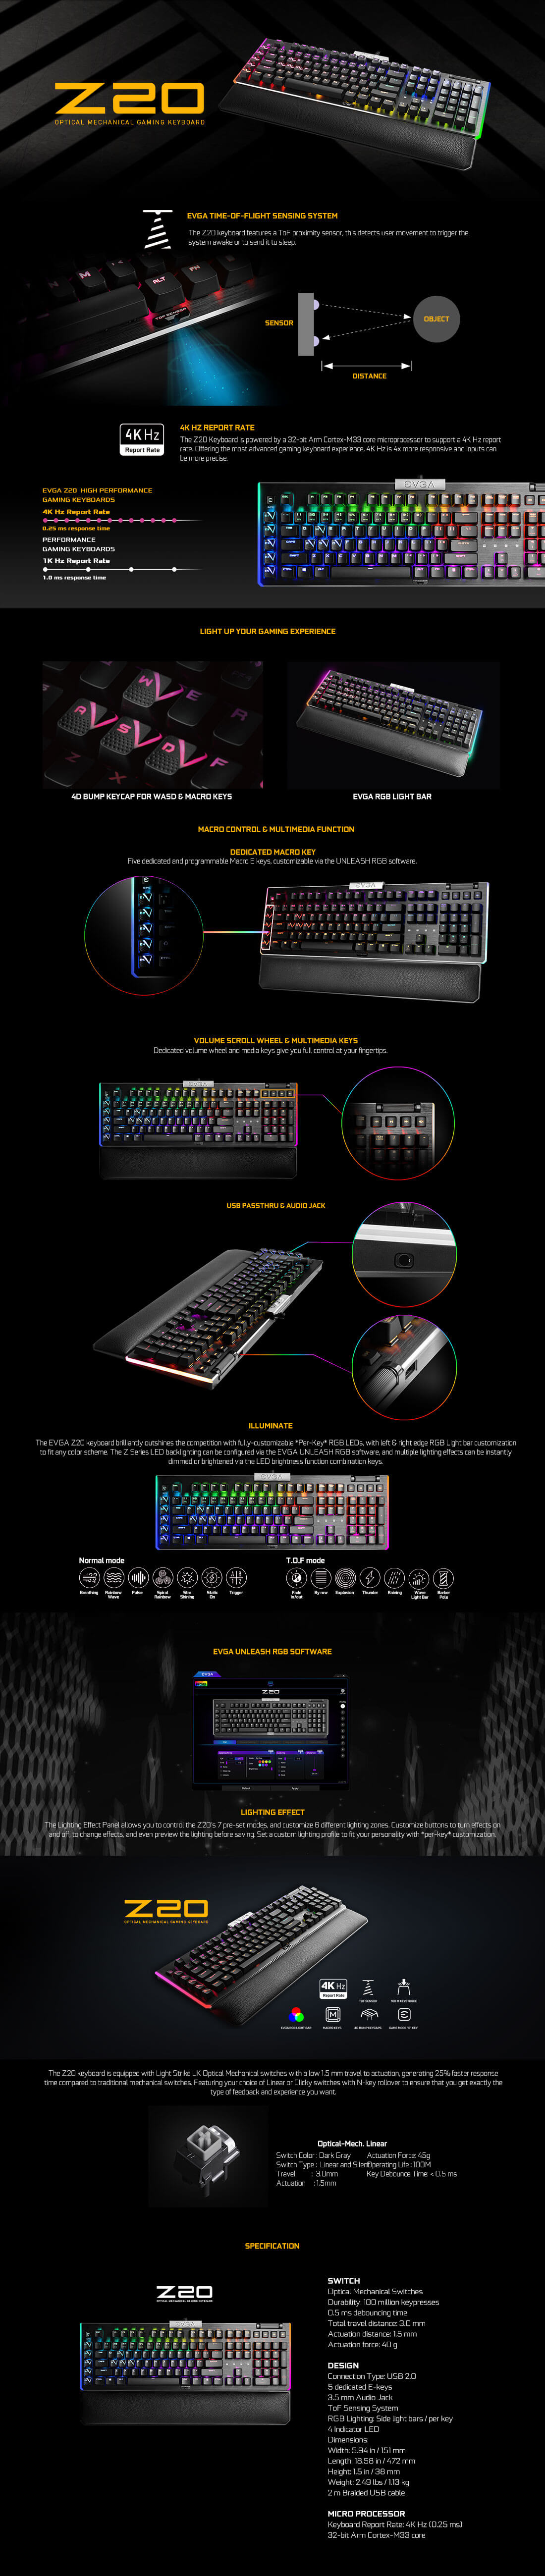 EVGA Z20 RGB Optical Mechanical (Linear Switch) Gaming Keyboard #1 SOHE LIFE ONE STOP LIFESTYLE GADGET STORE DESK SET UP E-COMMERCE SINGAPORE